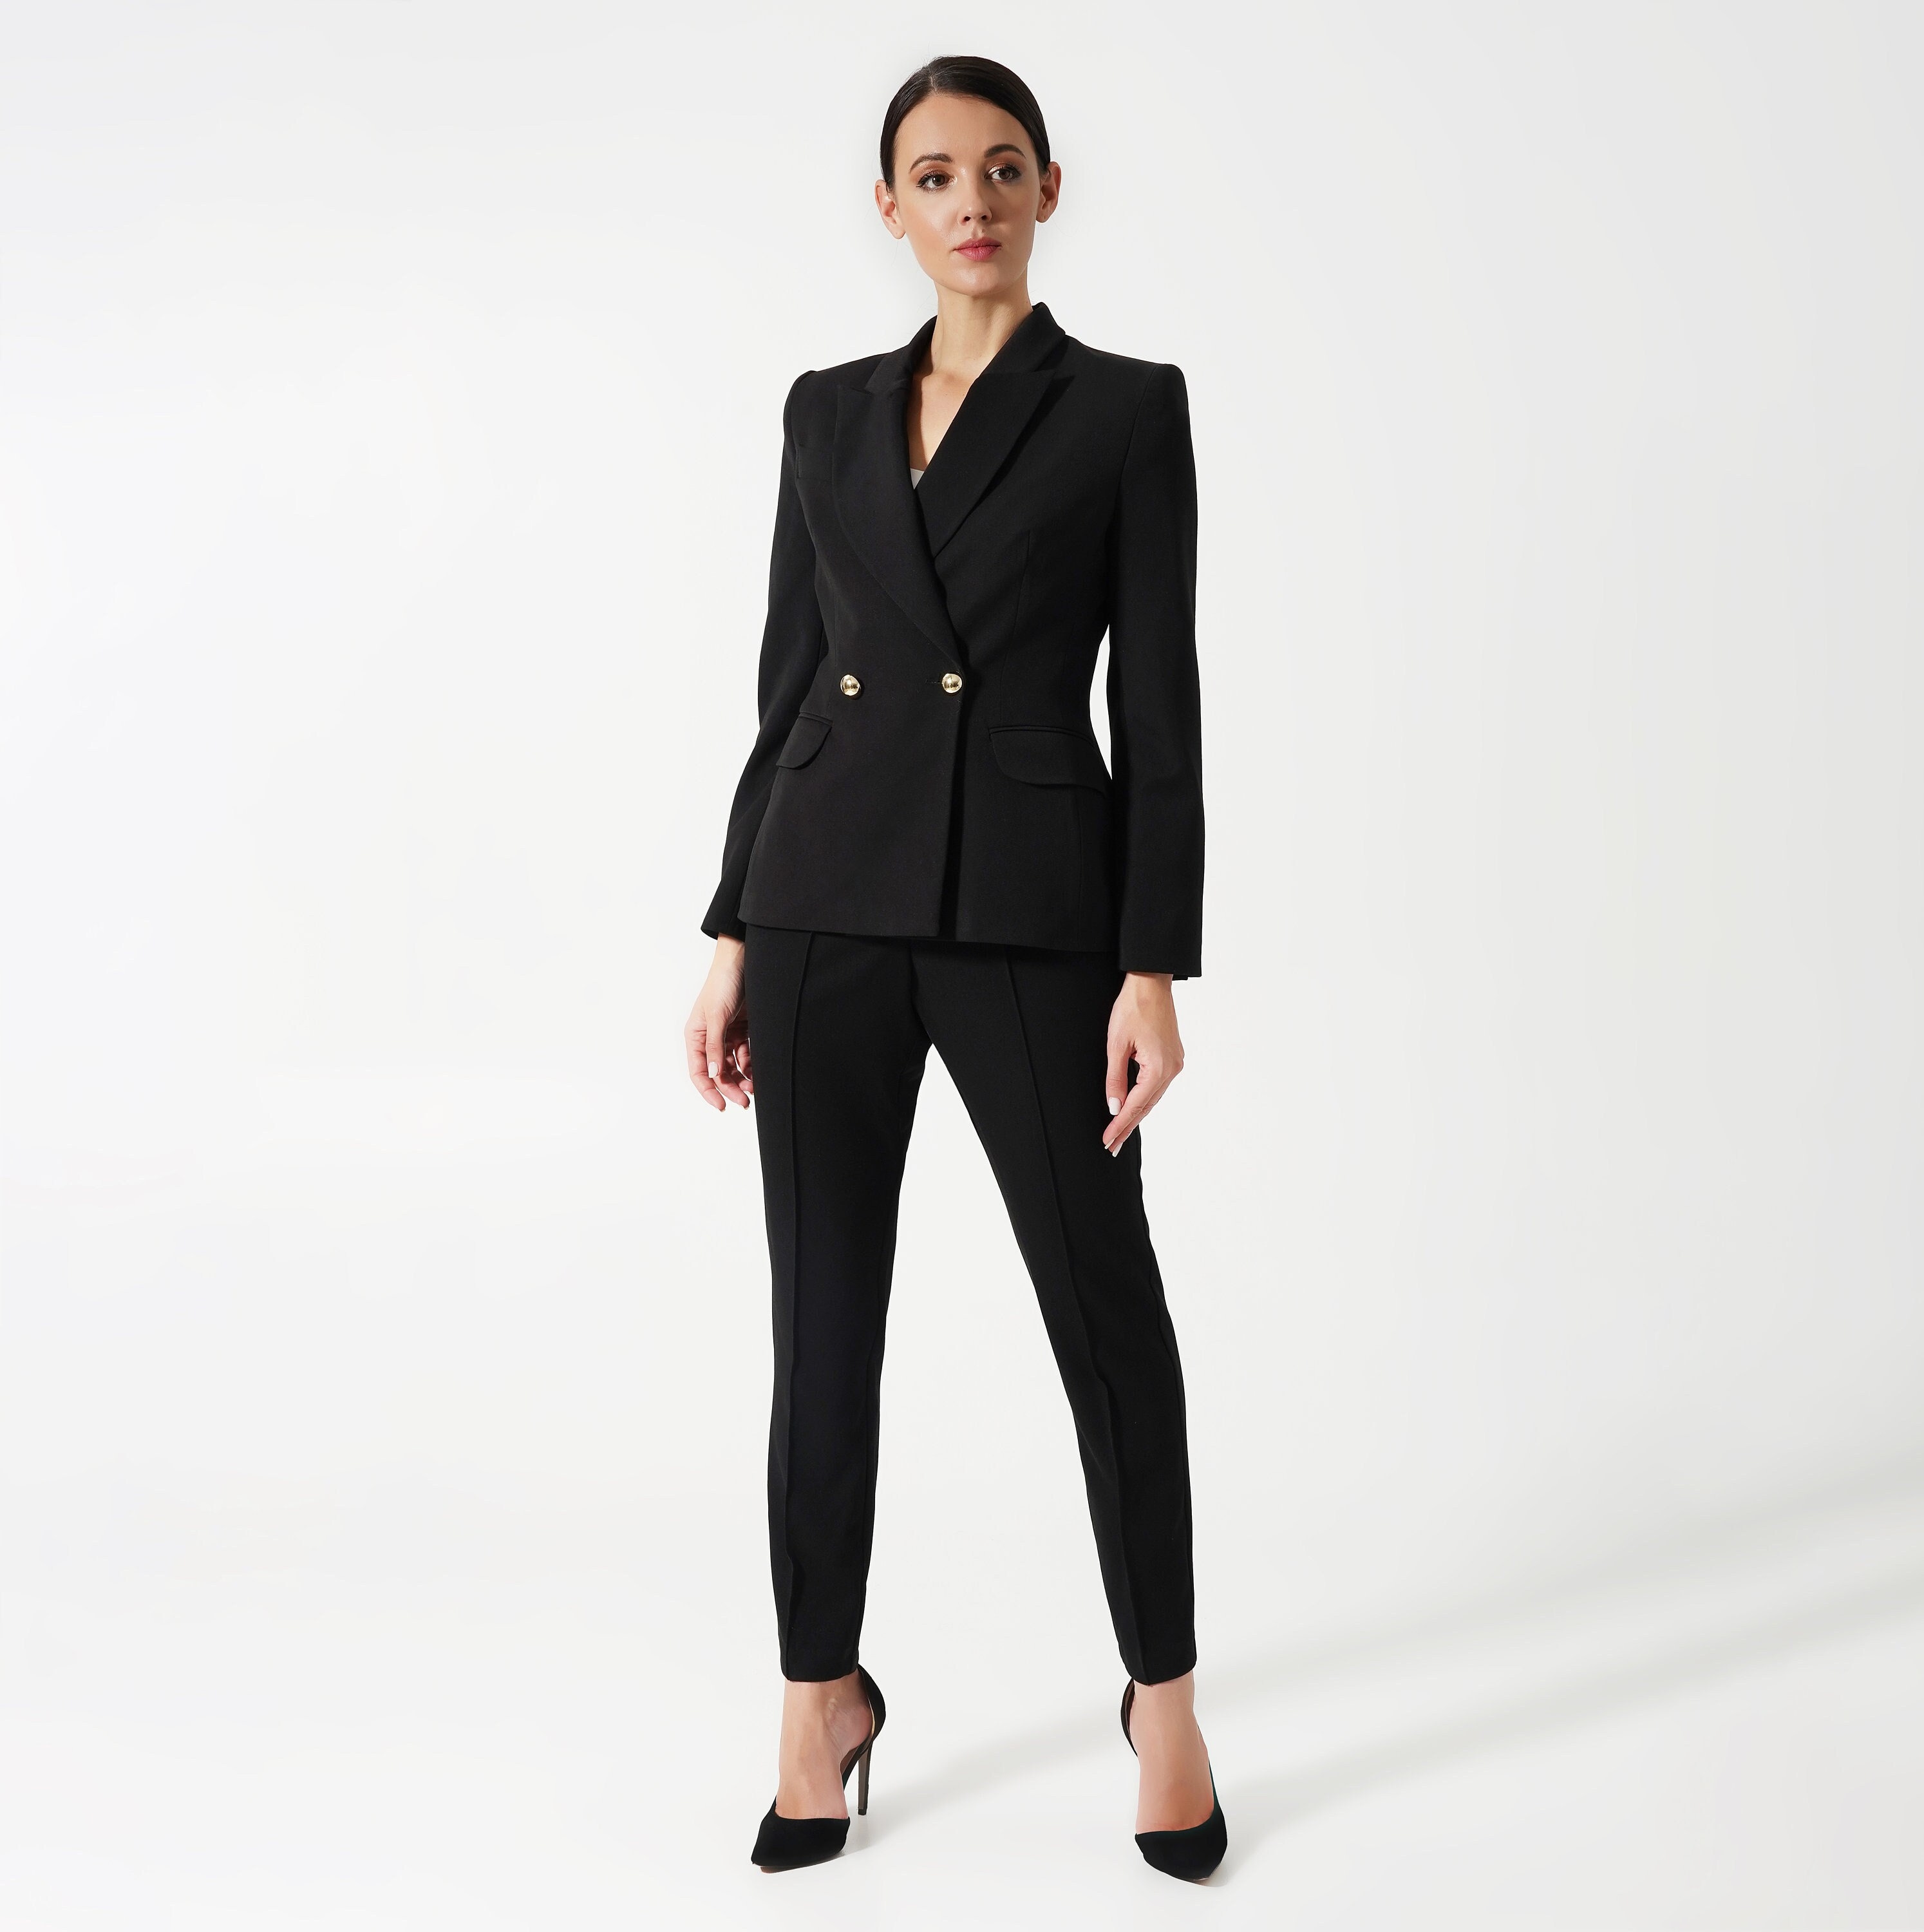 Black Pant Suit Women, Black Business Suit for Ladies, Classic Womens  Tuxedo Suit Jacket, Double Breasted Blazer and Pegged Pants TAVROVSKA 